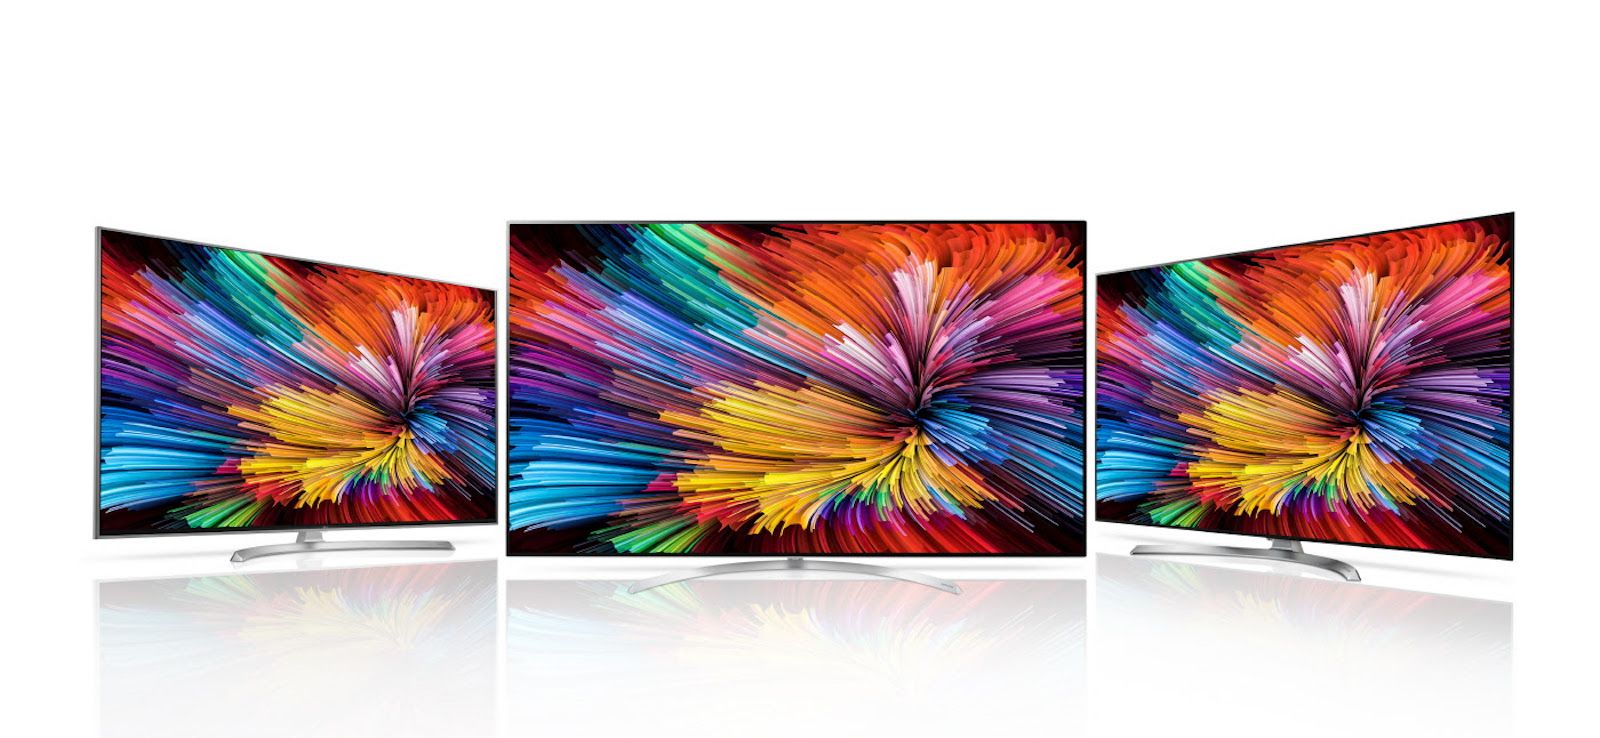 lg launches super uhd tvs with nano cell technology for more accurate colours image 1